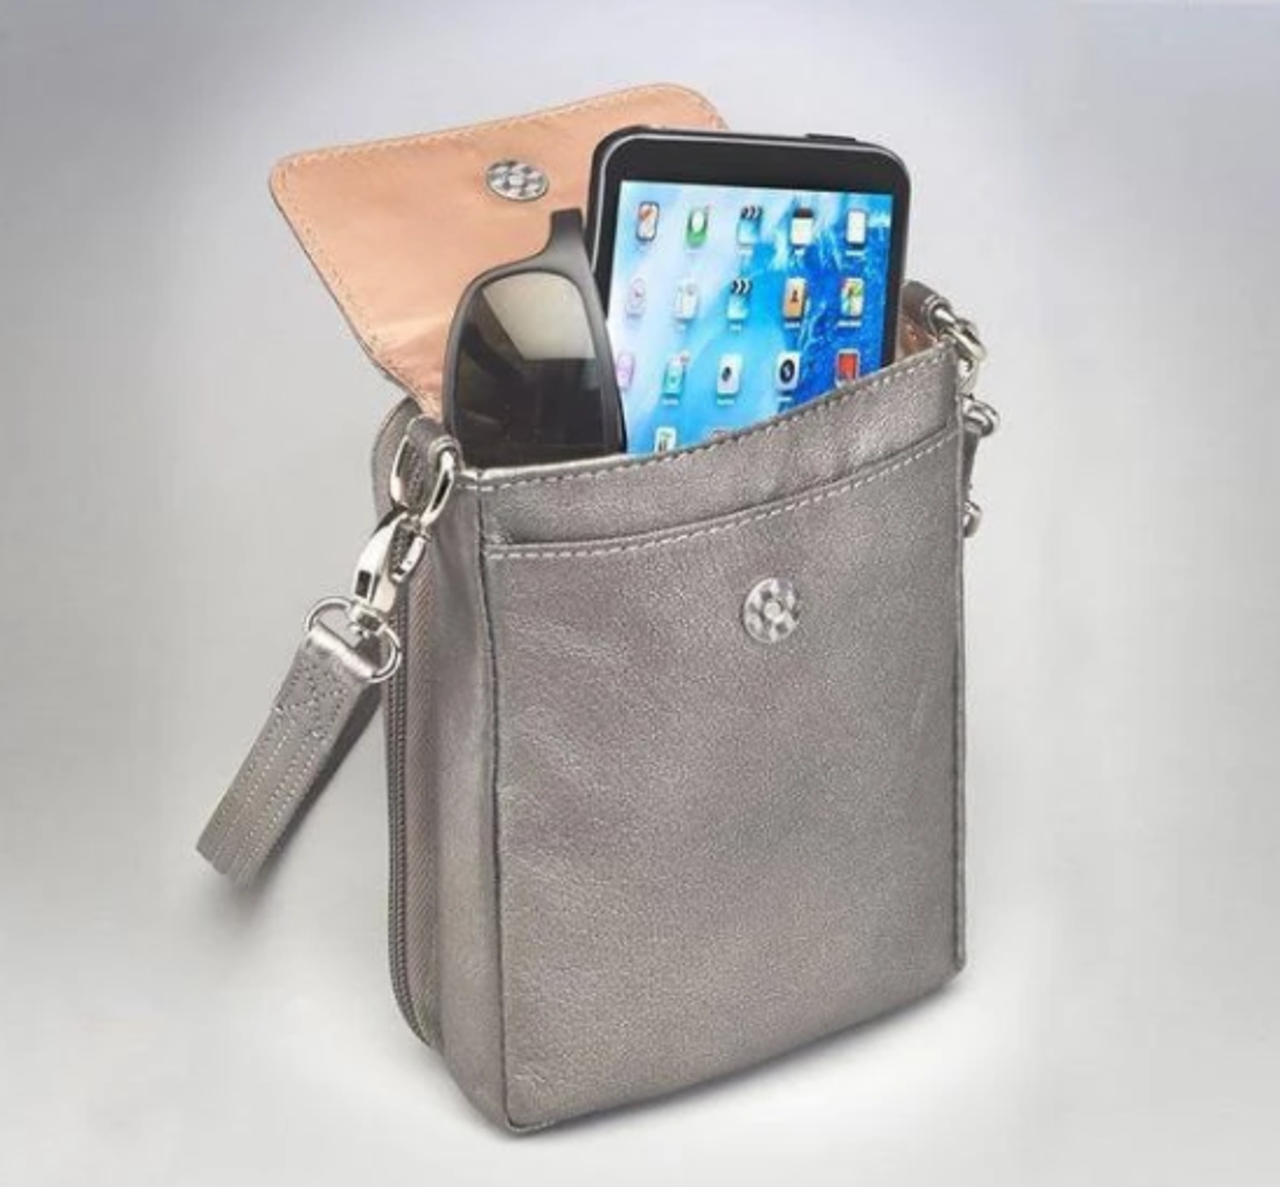 Best Cell Phone Purse